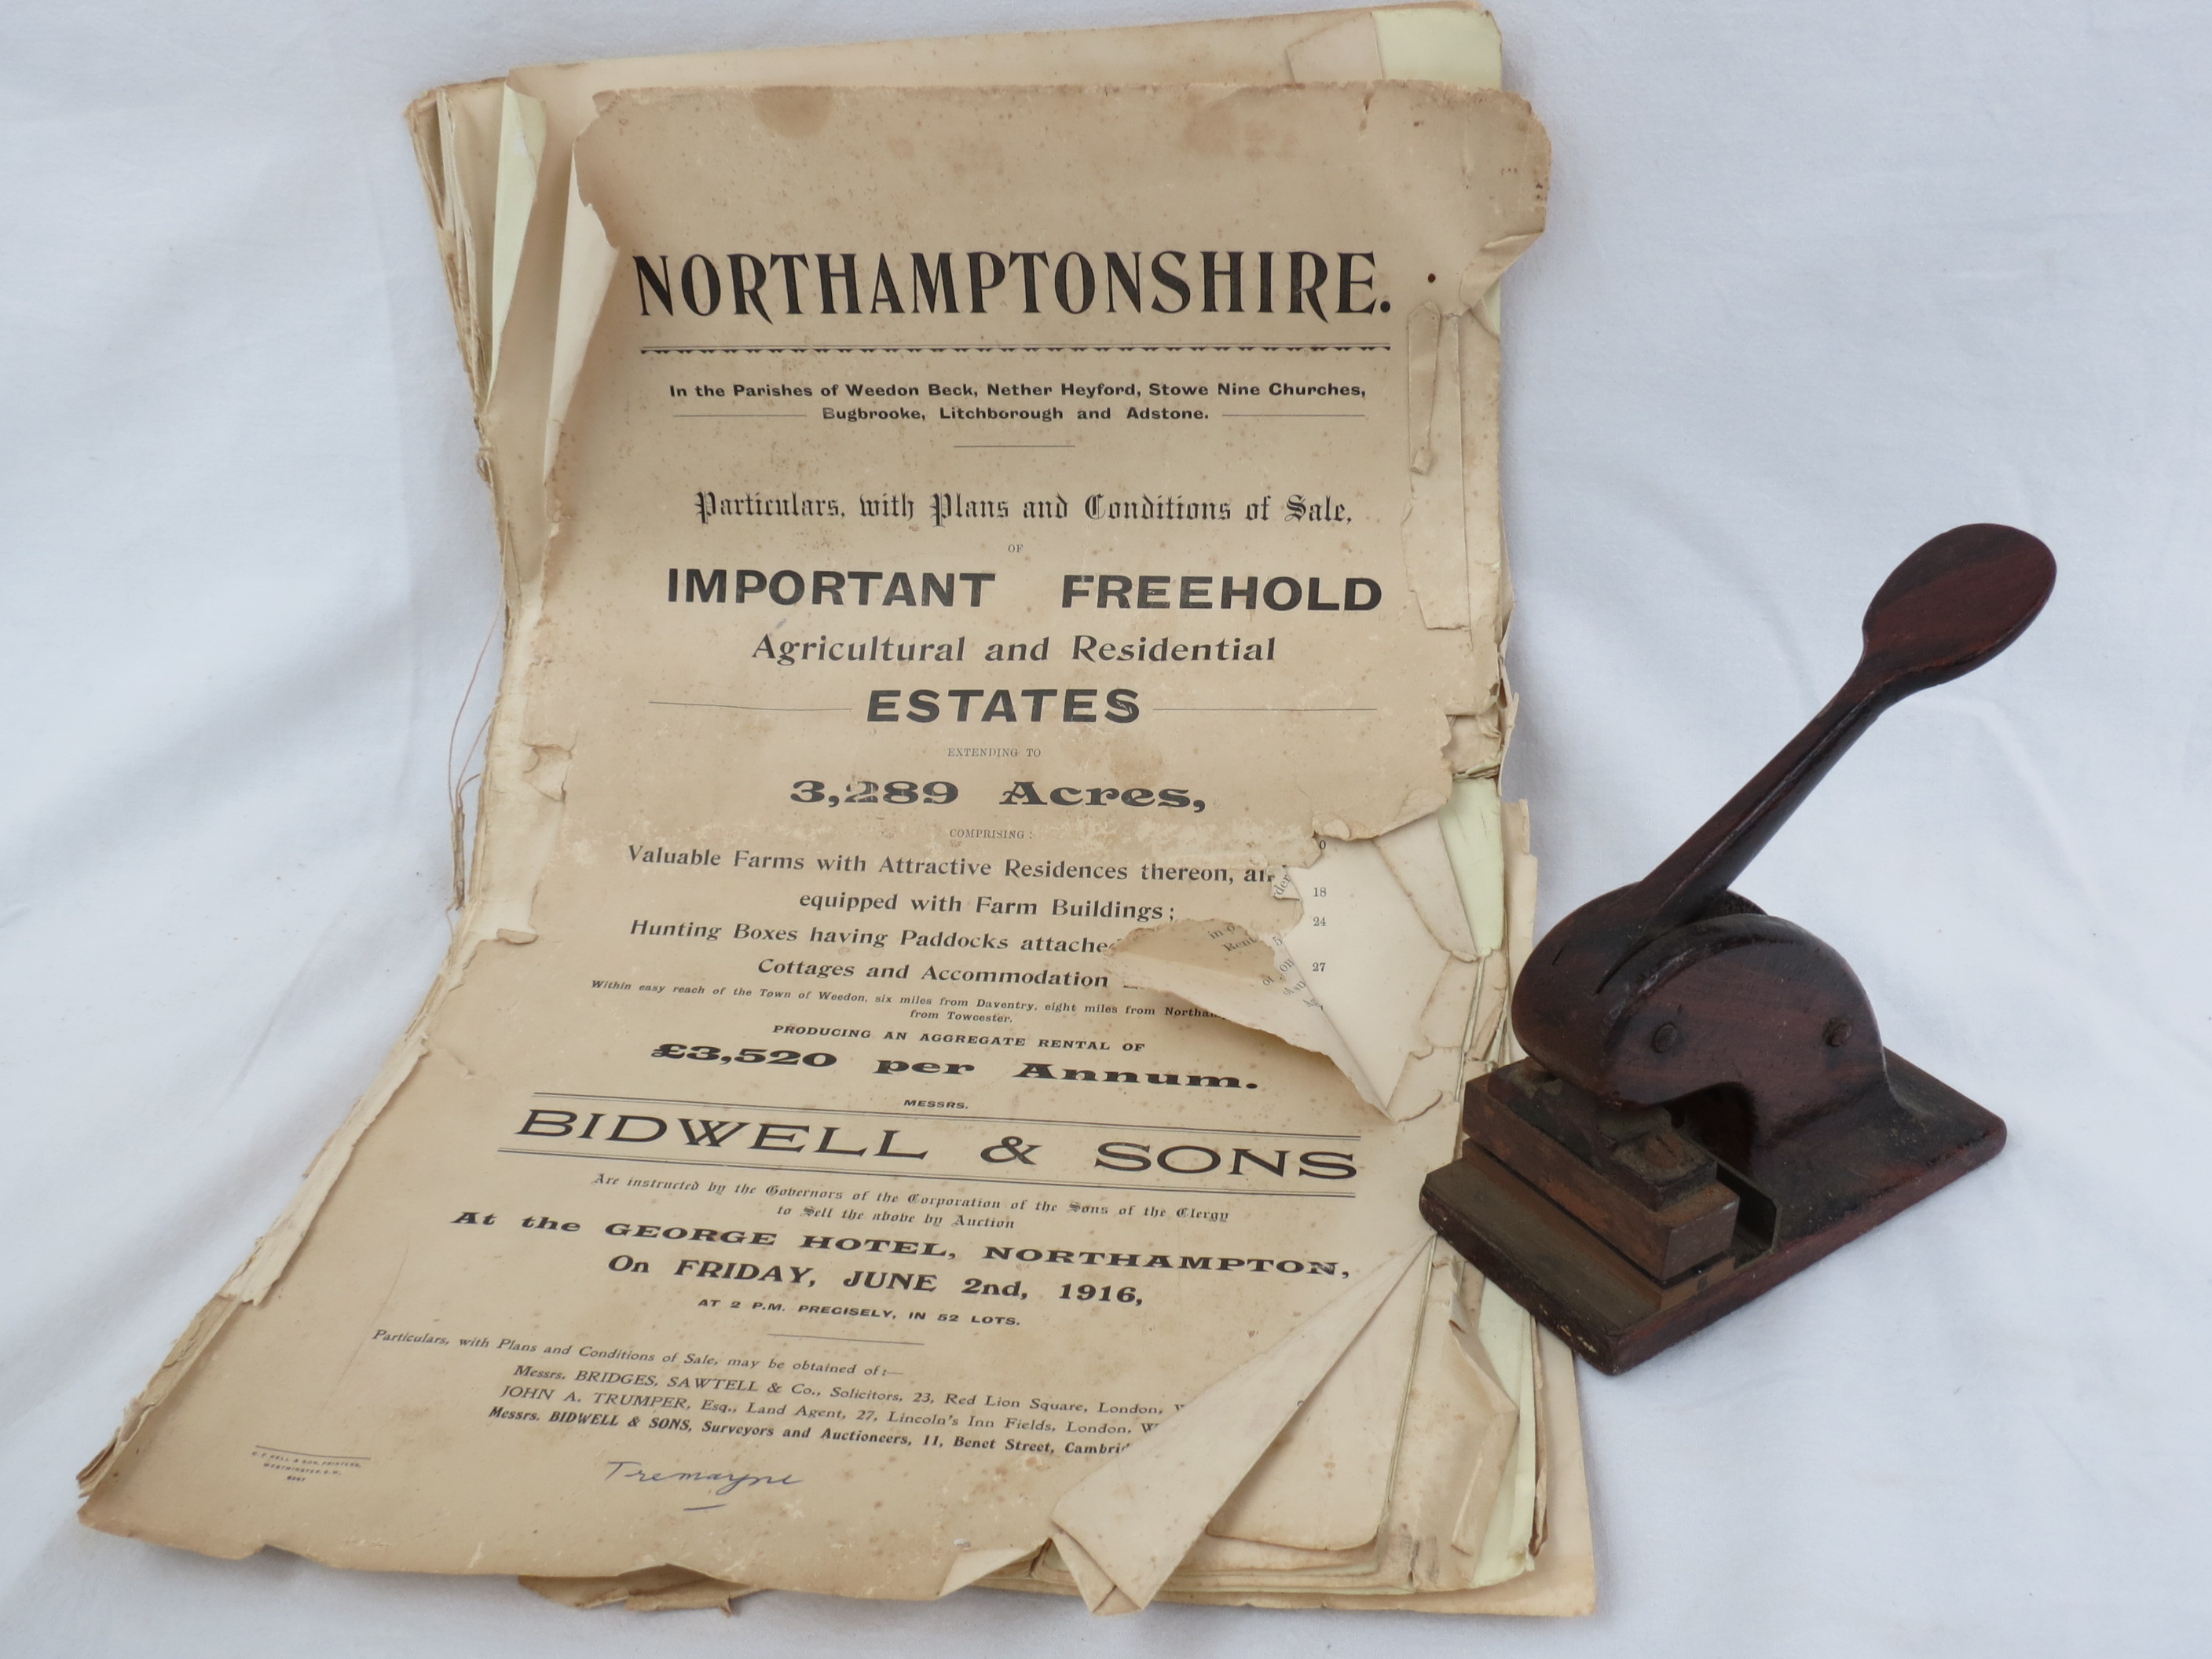 LOT WITHDRAWN. An auction catalogue of Bidwell & Sons in respect of the sale of freehold properties,